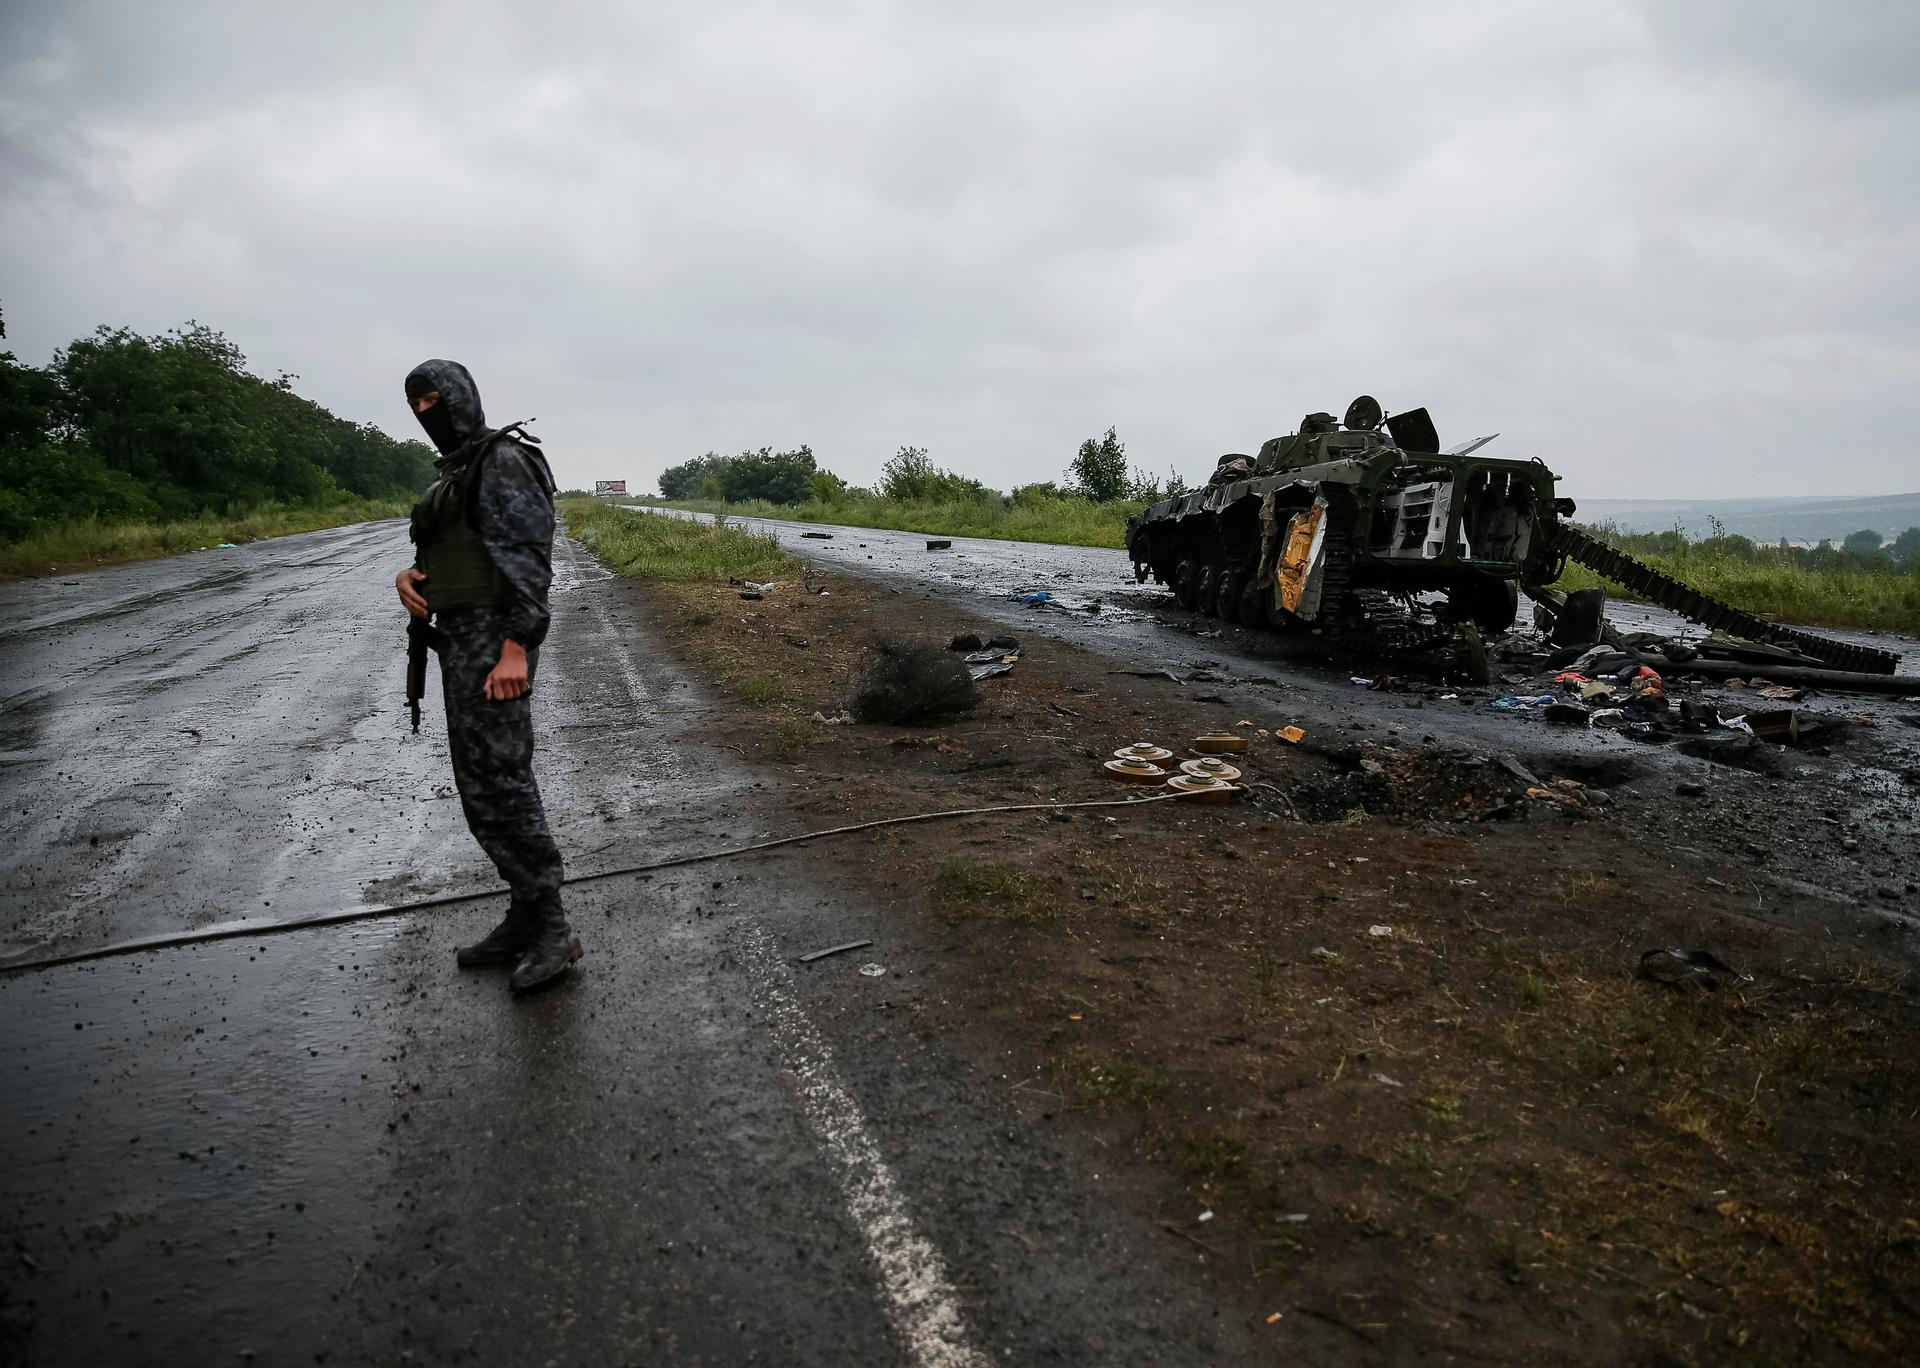 A Ukrainian soldier stands near a destroyed military vehicle of pro-Russian separatists just outside the eastern Ukrainian town of Slaviansk, July 7, 2014. REUTERS/Gleb Garanich